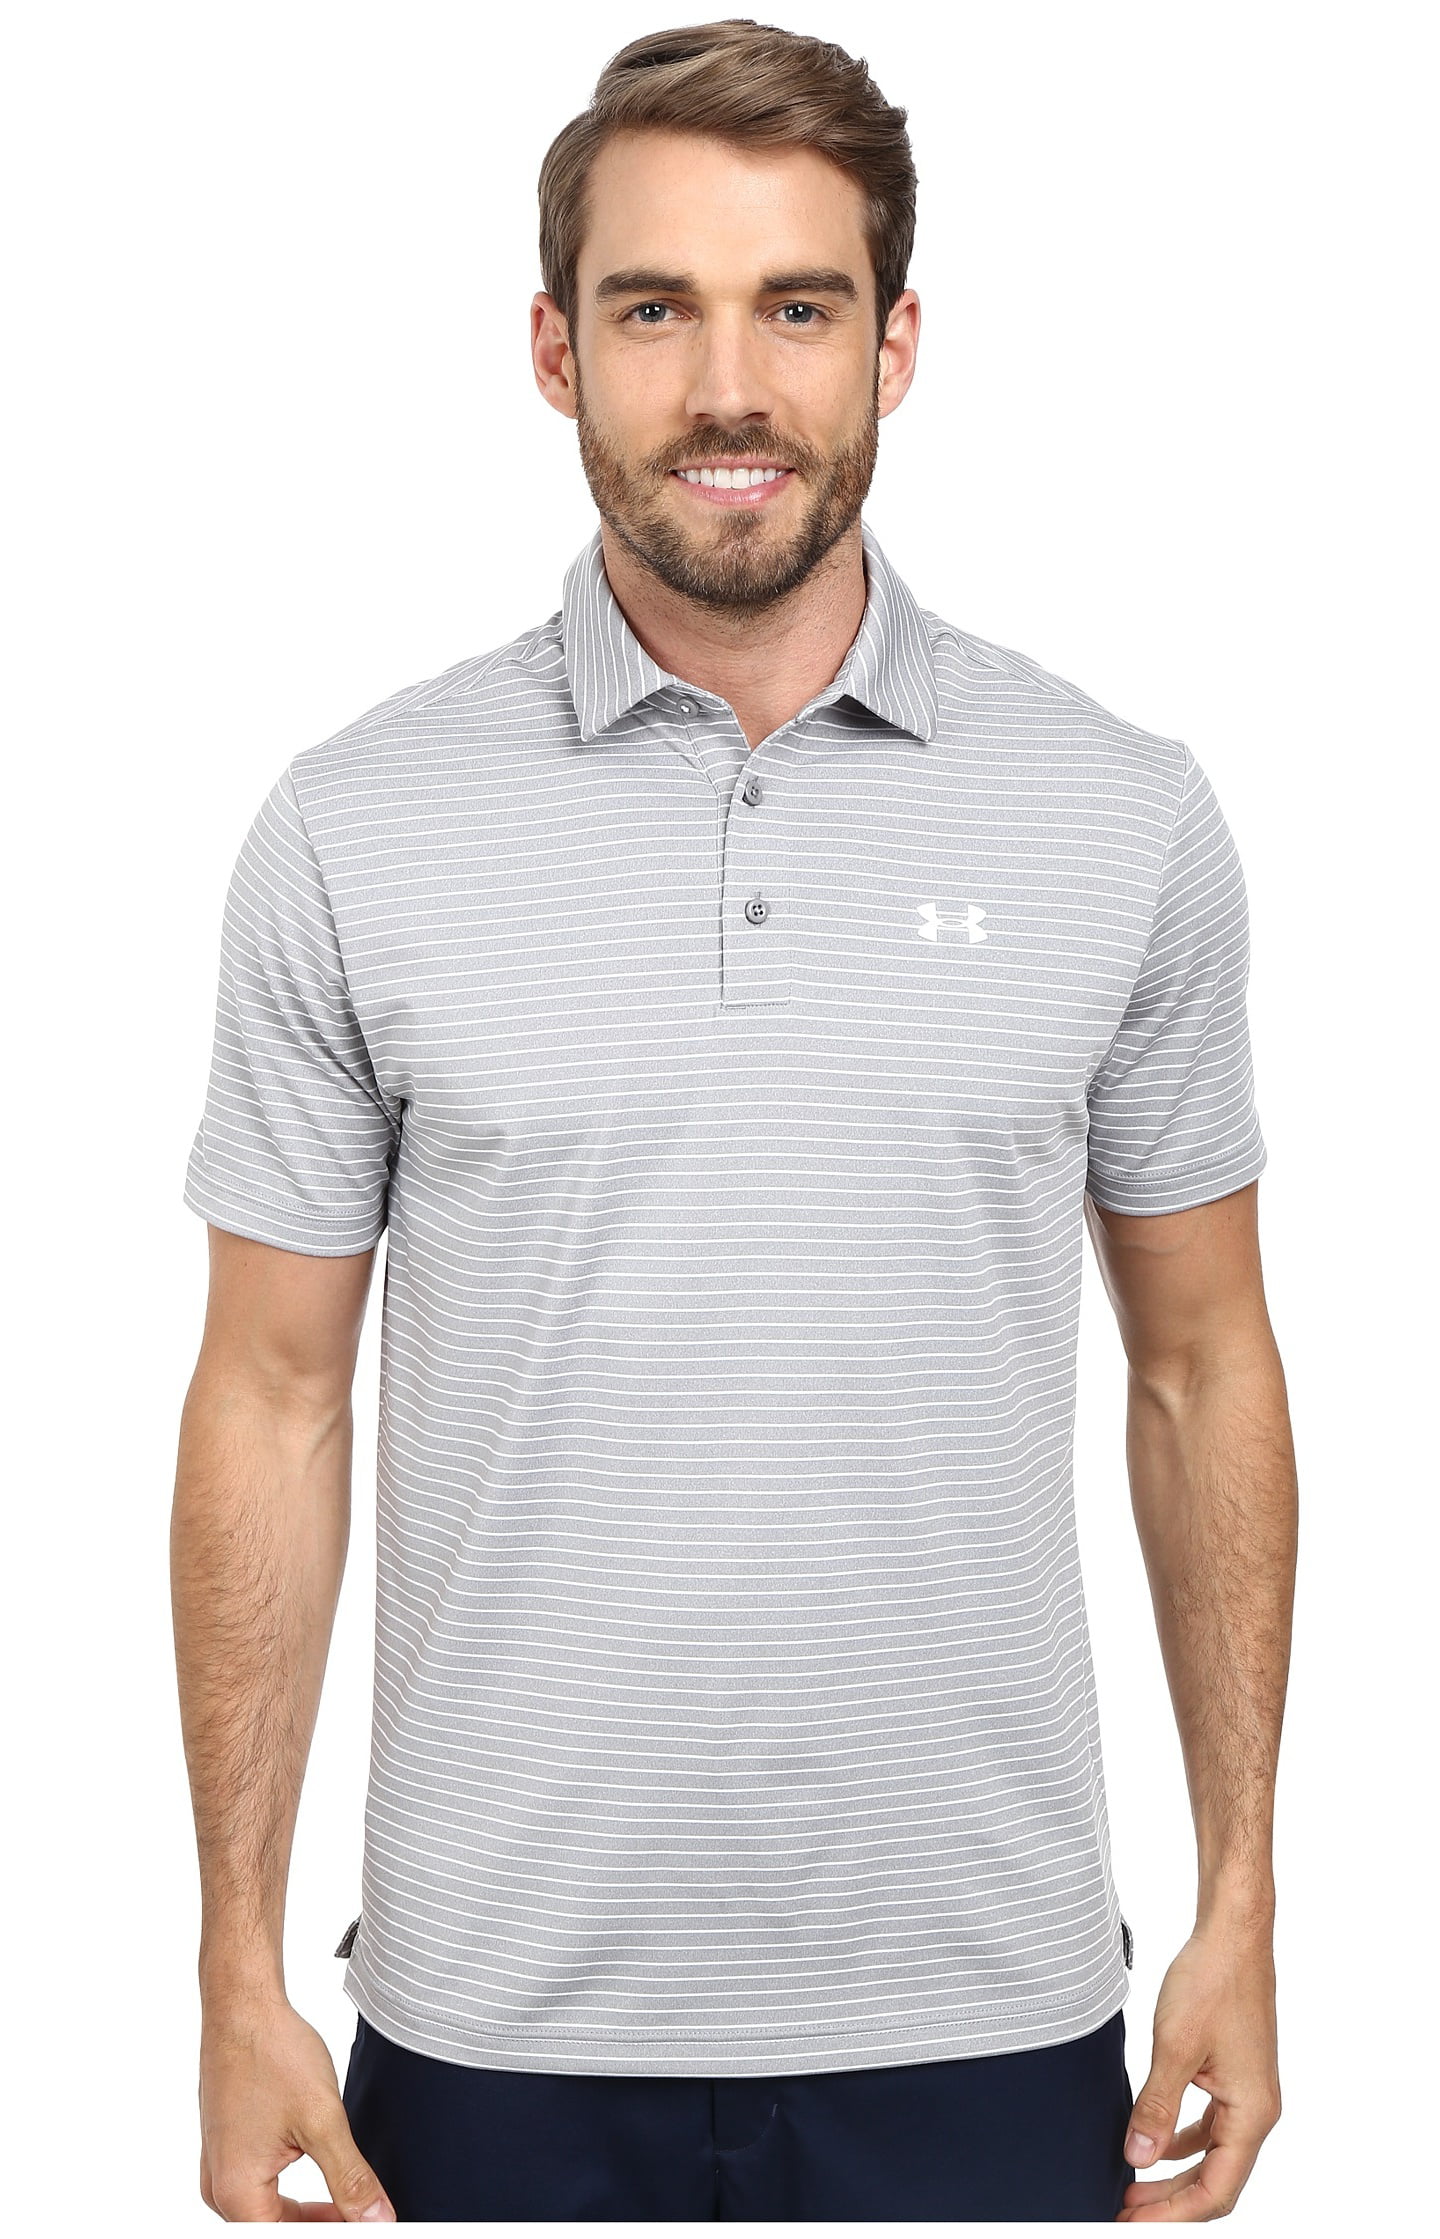 New Mens Under Armour Muscle Golf Polo 